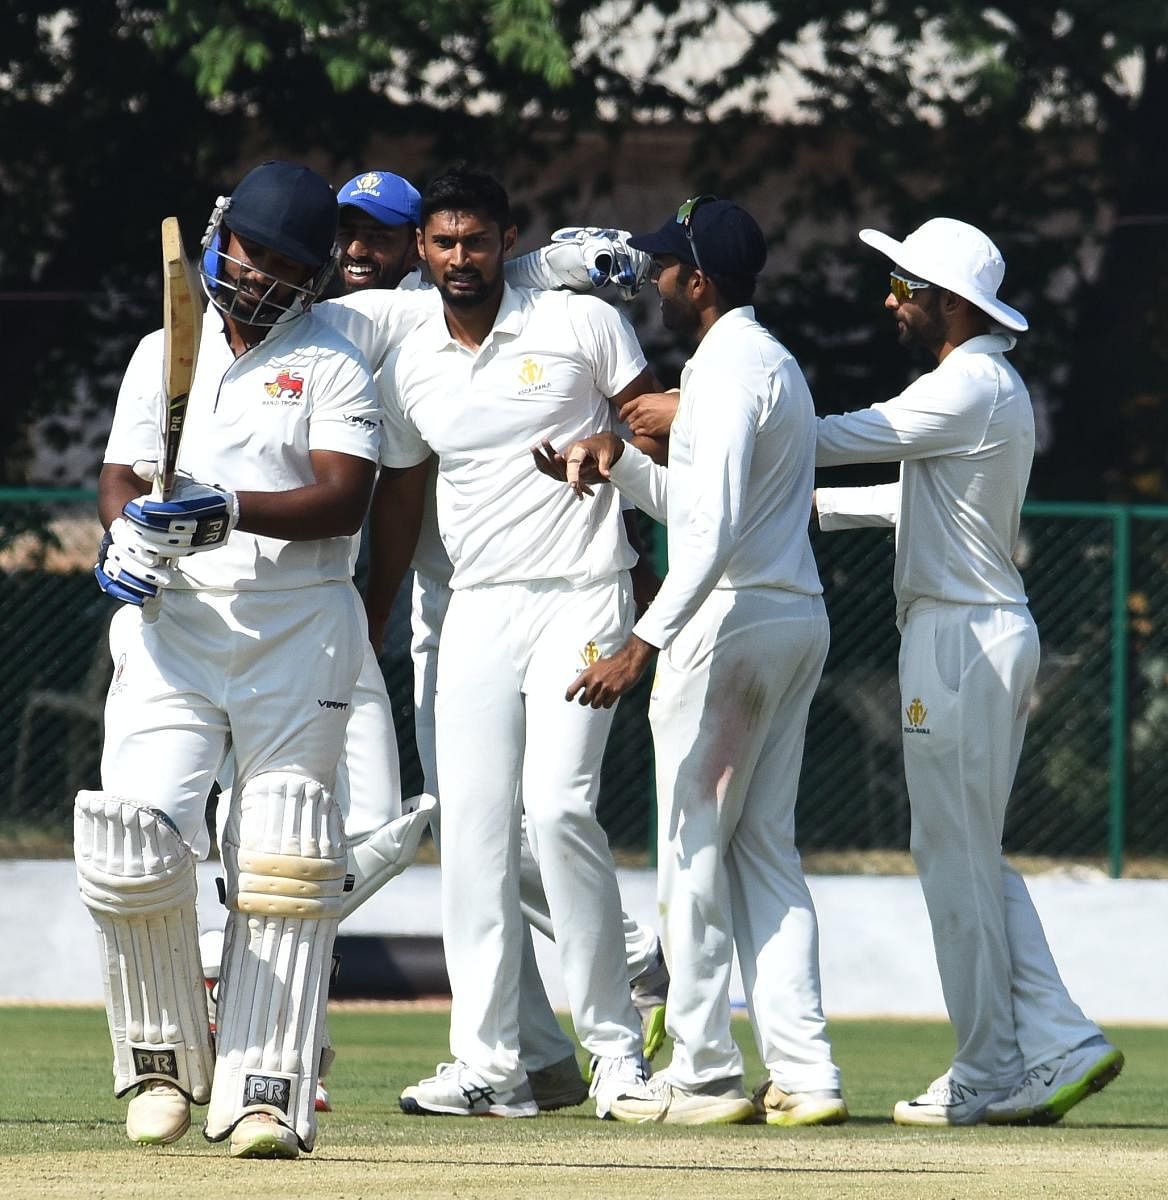 Karnataka paceman Ronit More (centre) is congratulated by team-mates after dismissing a Mumbai batsman in the Ranji Trophy game at Belagavi on Thursday. DH PHOTO/ Tajuddin Azad